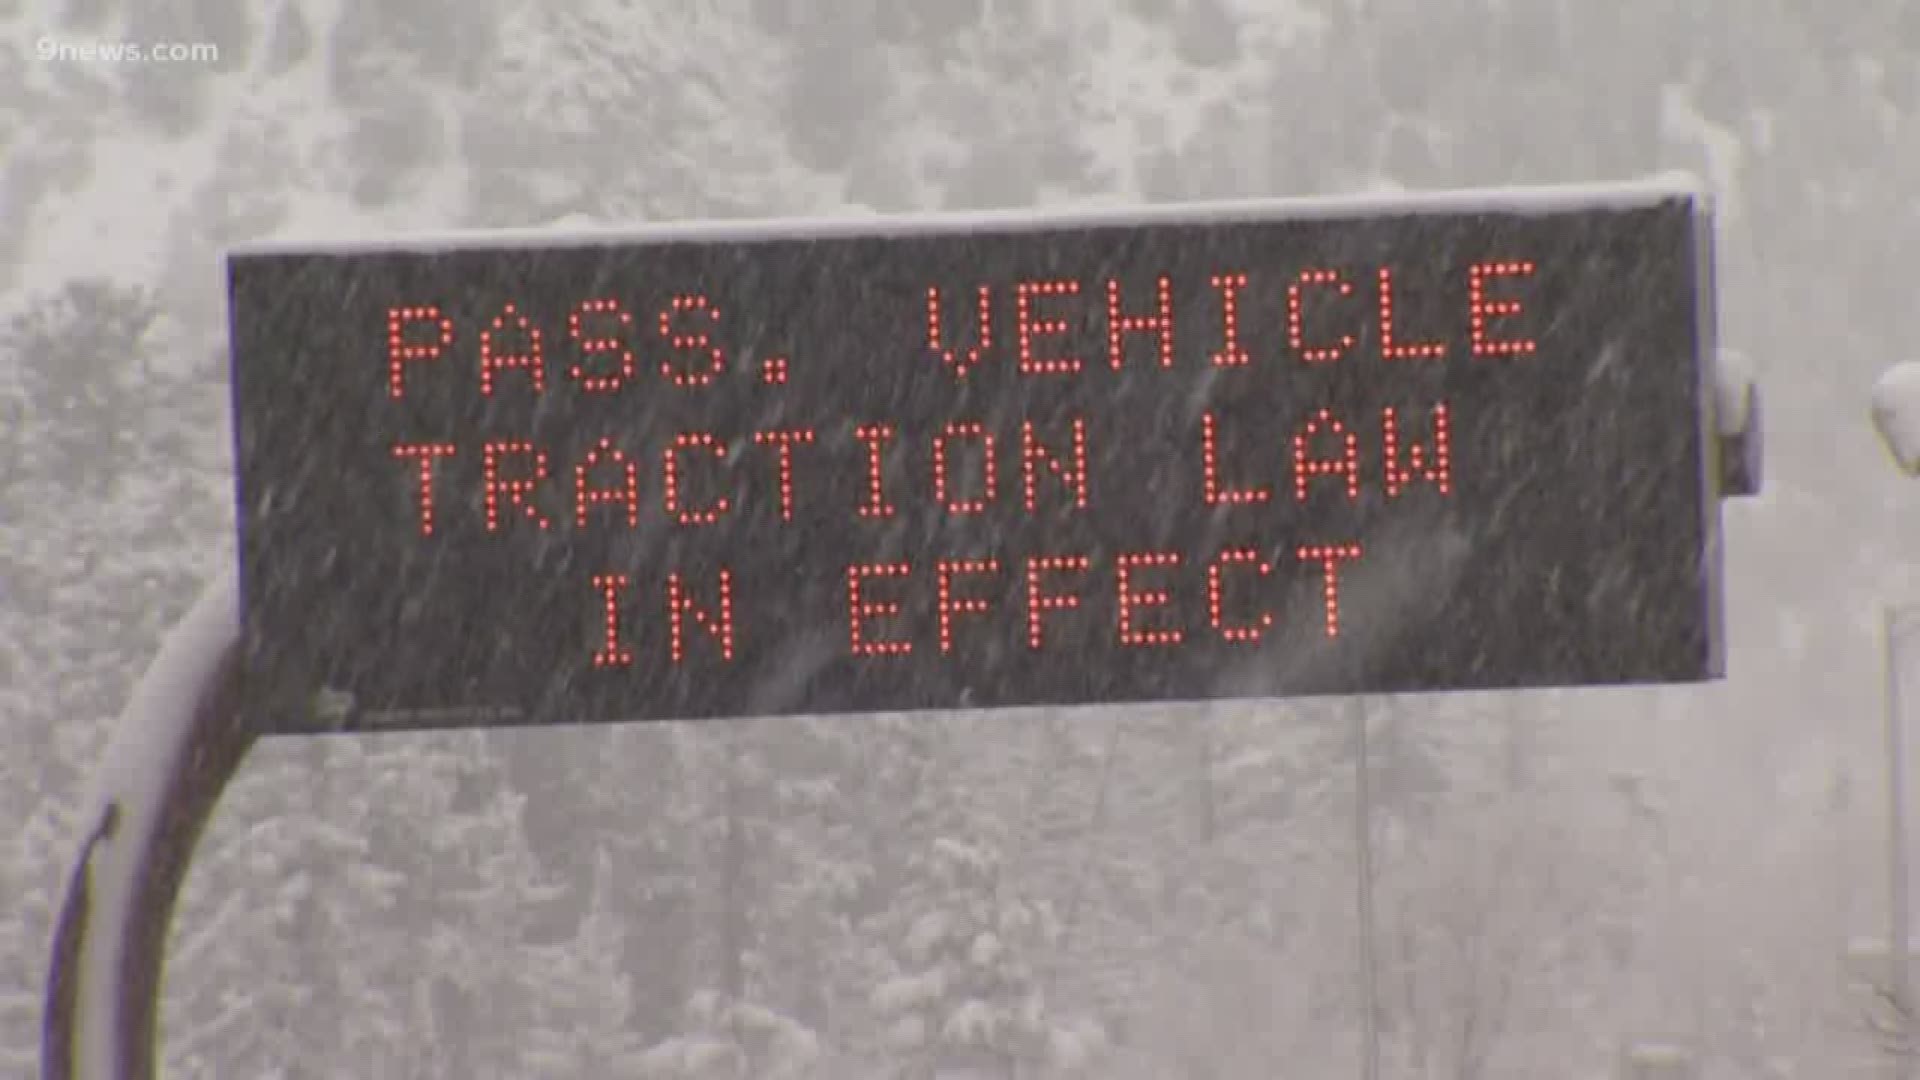 Colorado drivers are expected to be equipped for winter conditions on I-70, but rental cars may not be in compliance.